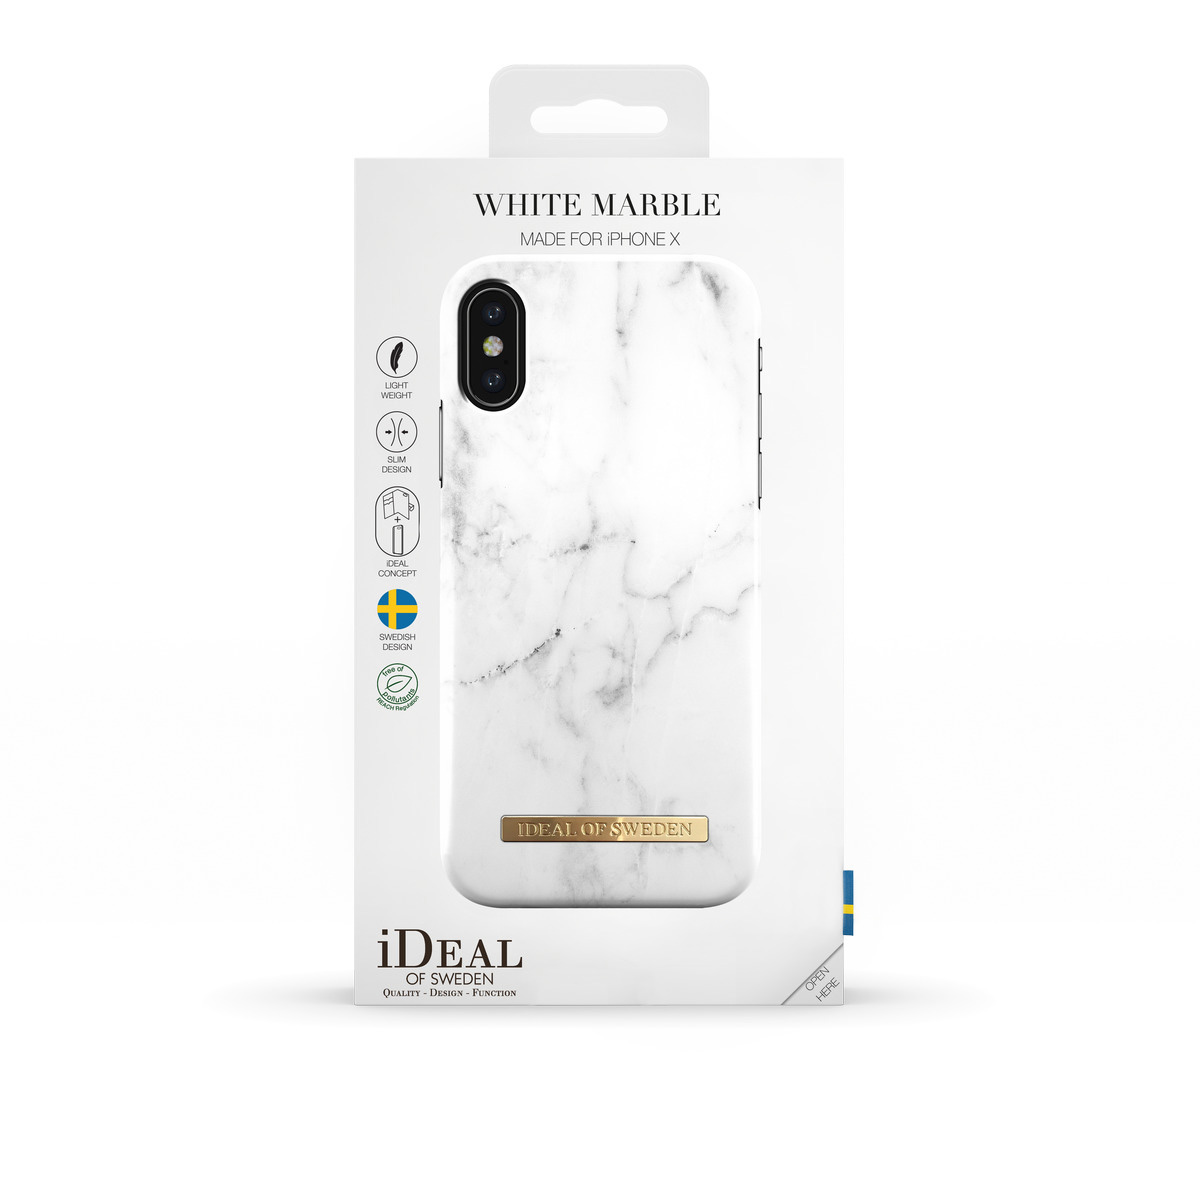 iPhone Backcover, Fashion, White Apple, SWEDEN OF IDEAL X, Marble